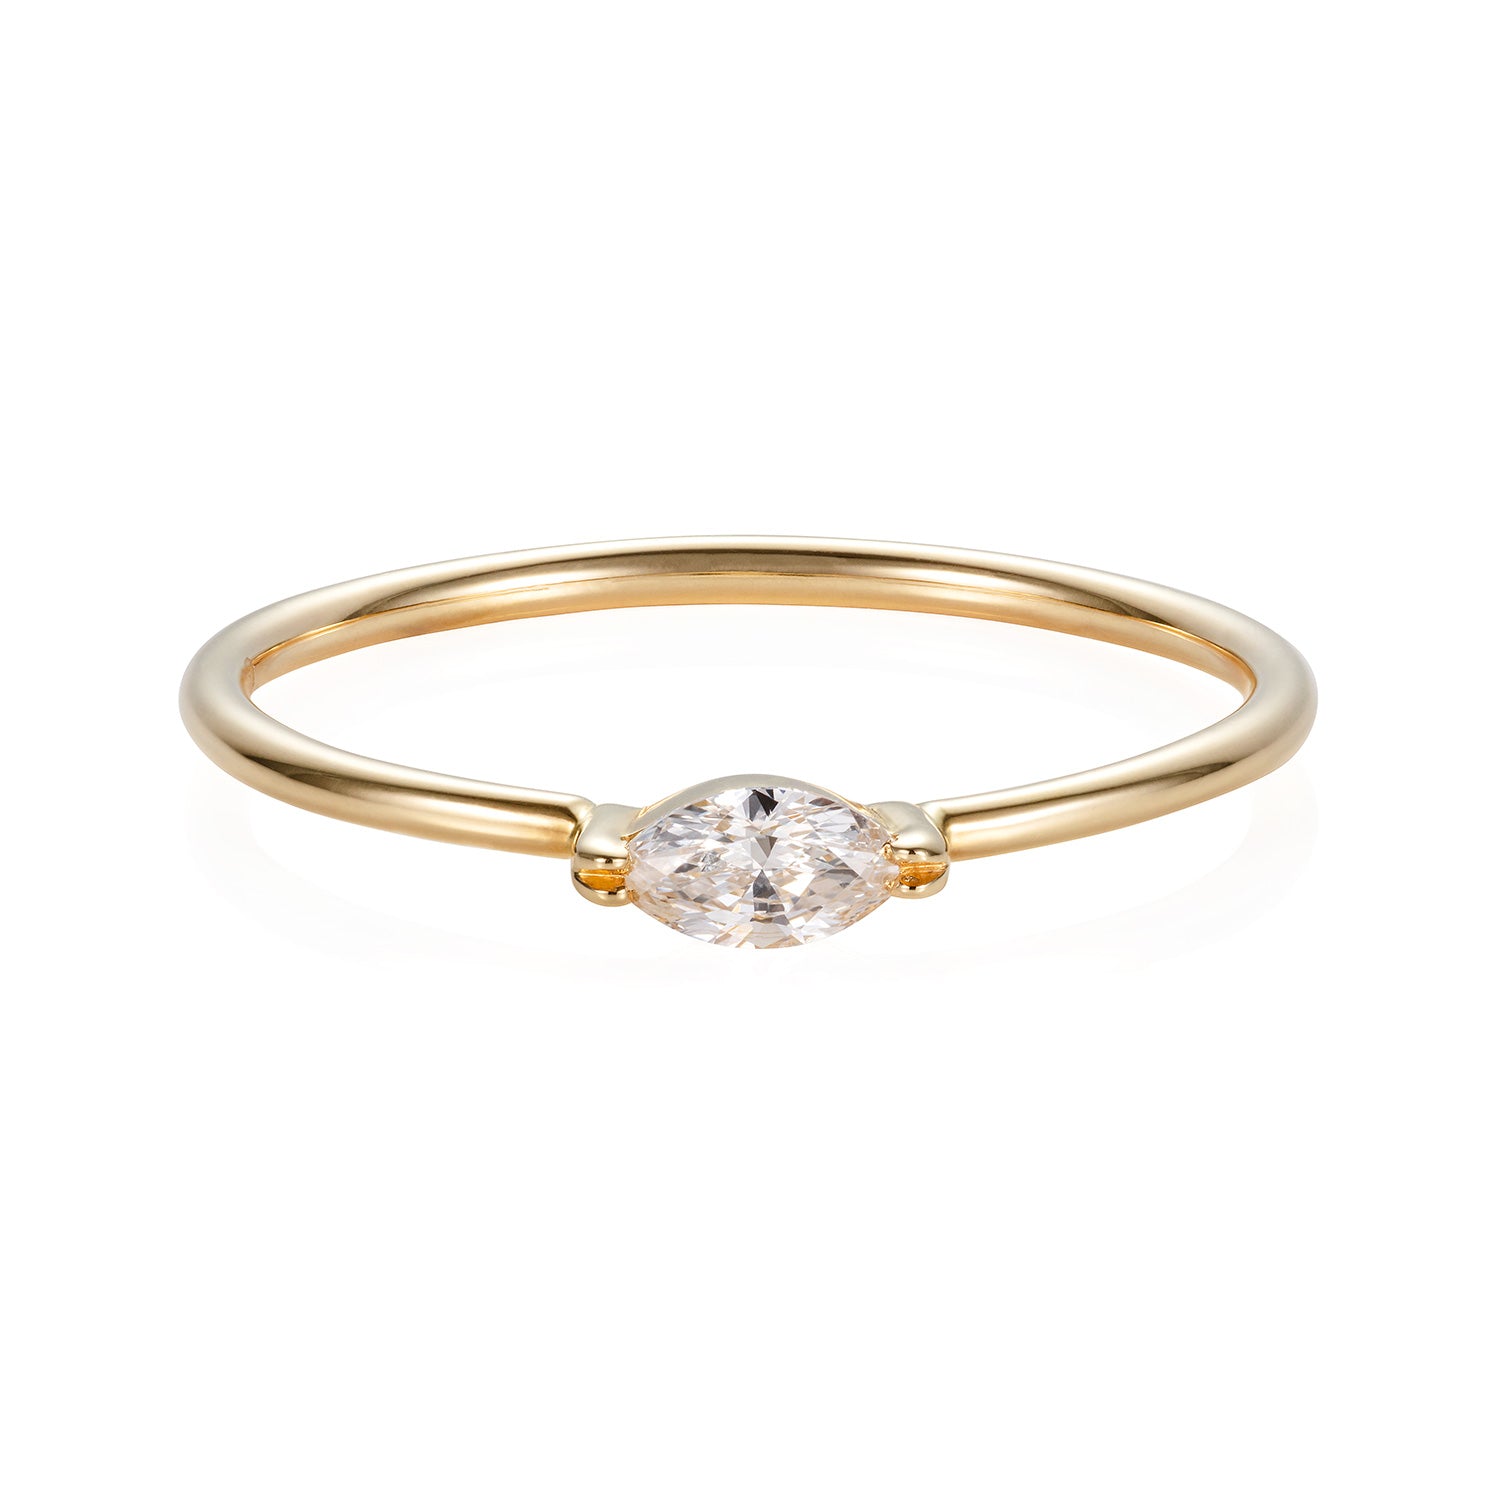 Sweet Pea 18ct yellow gold white diamond marquise engagement ring.